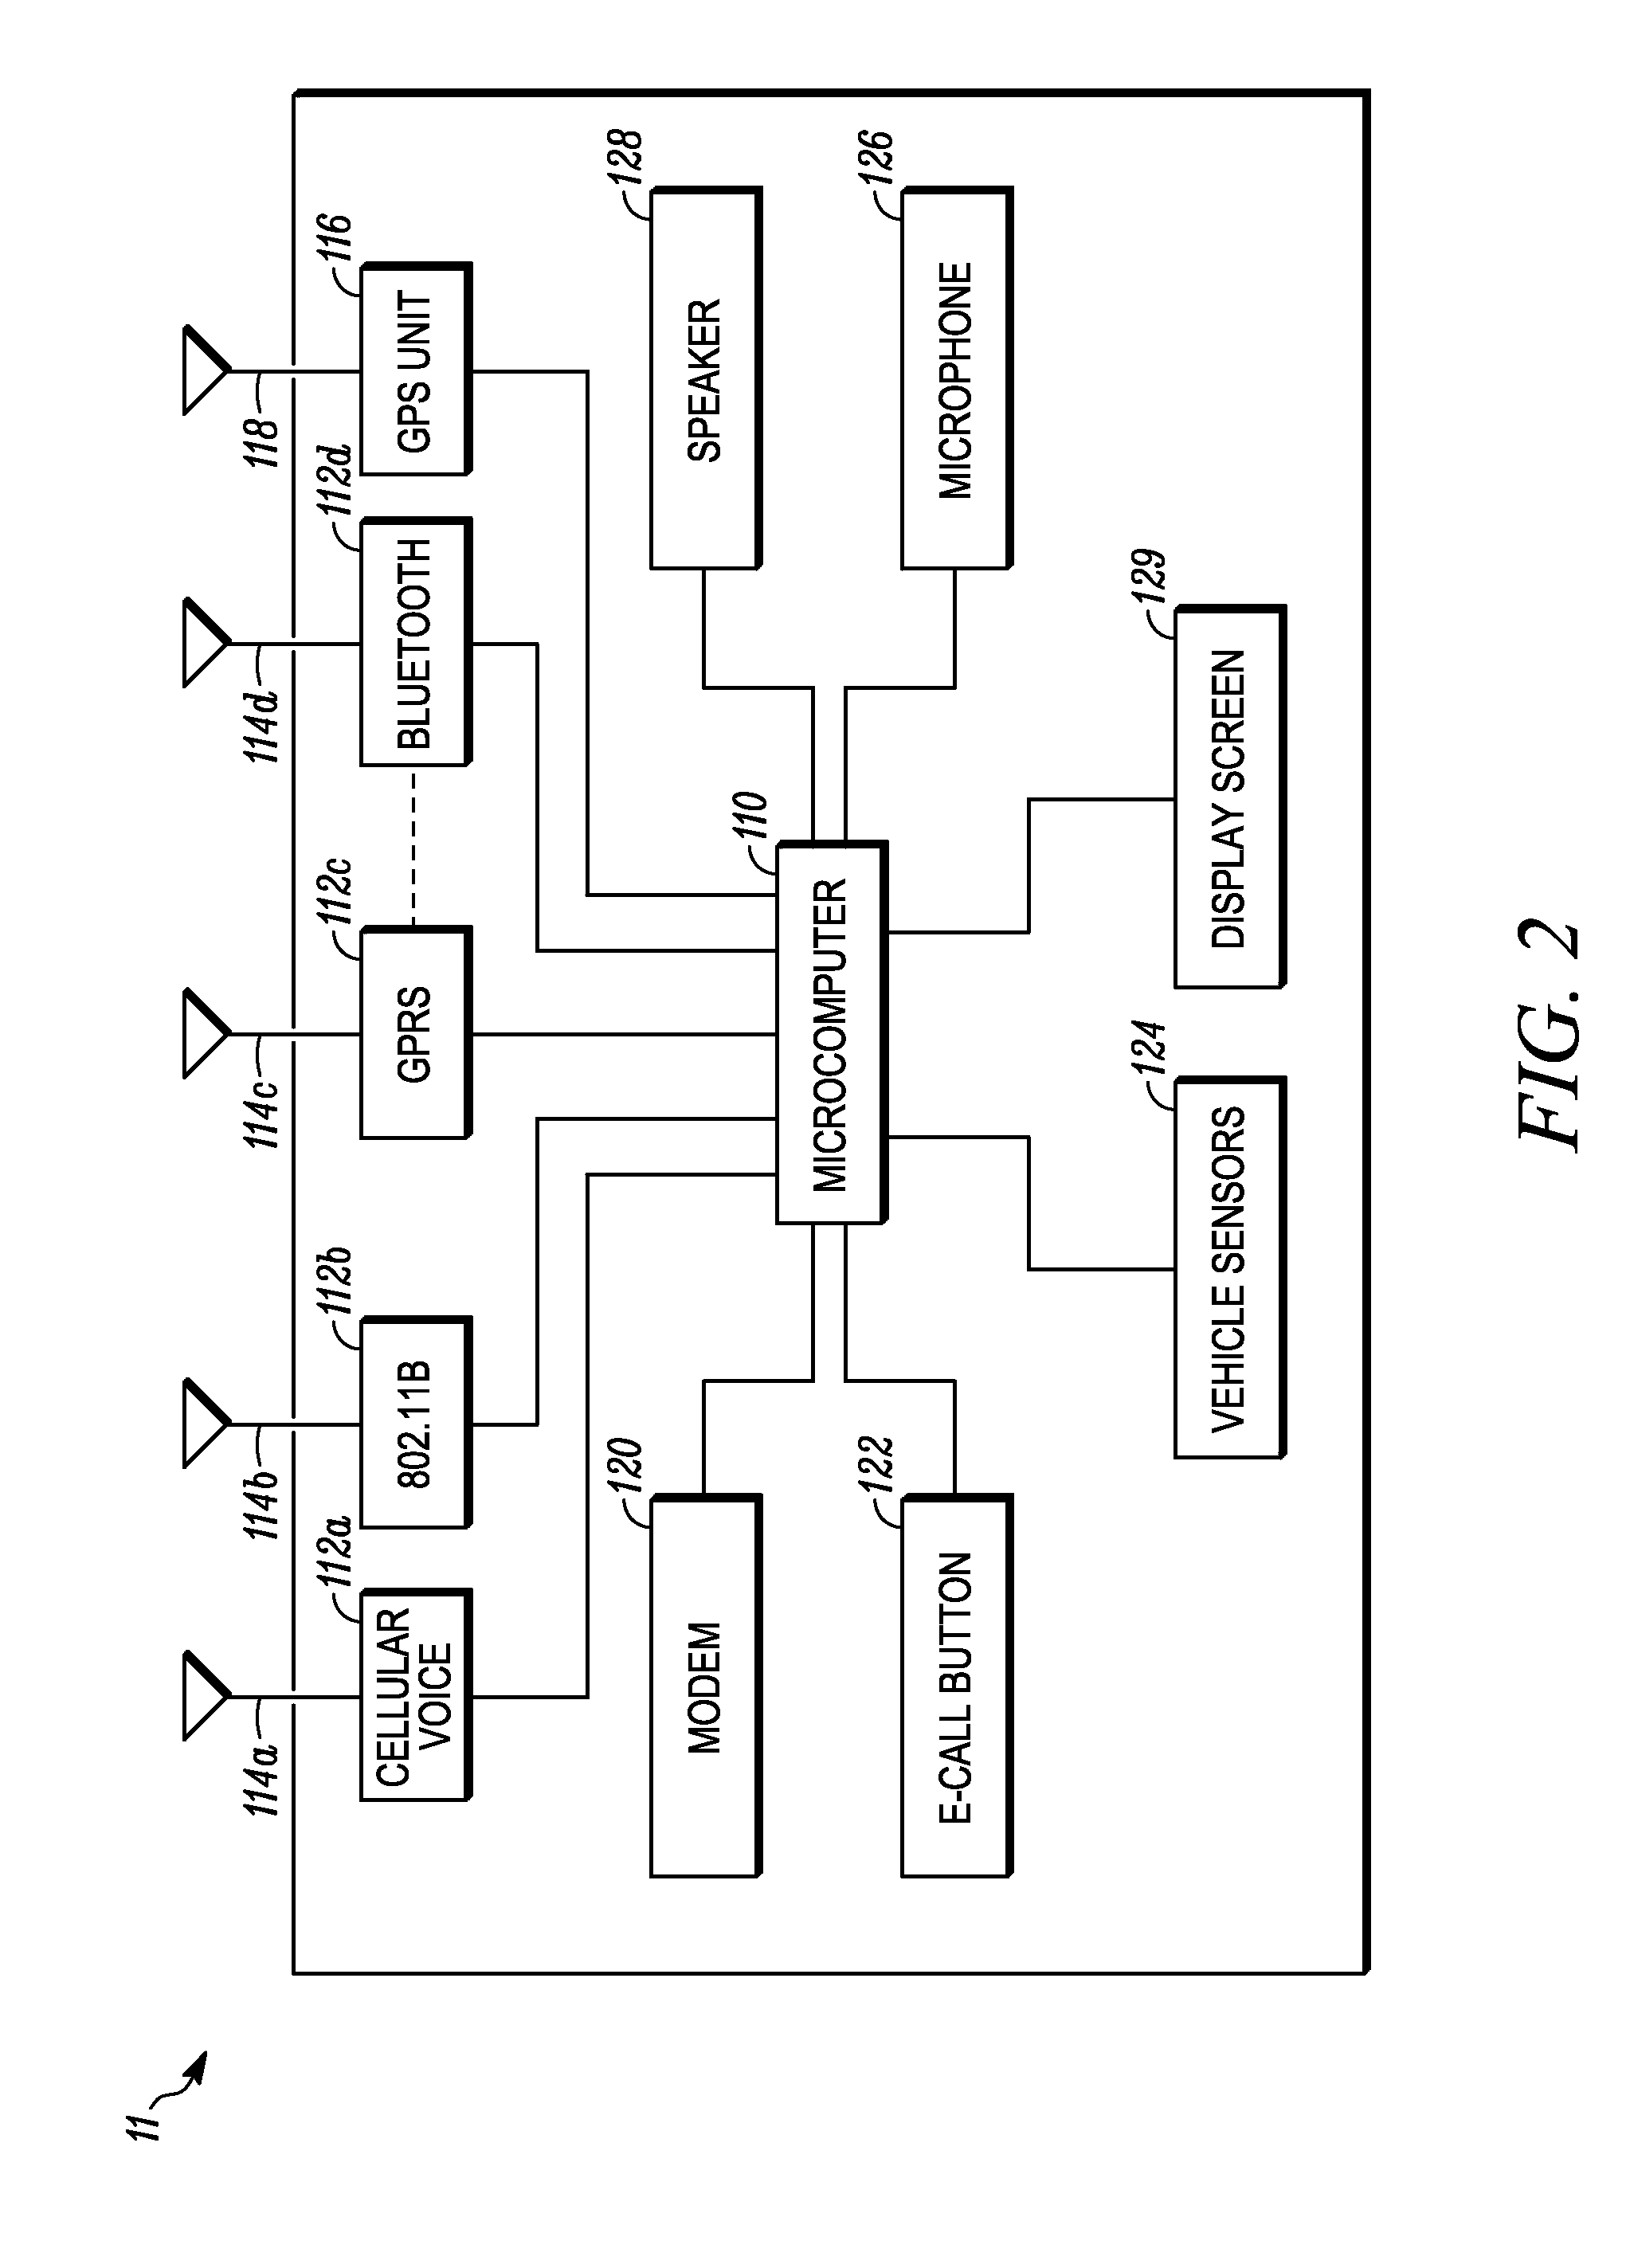 System and method for initiating an emergency call from a device to an emergency call processing system